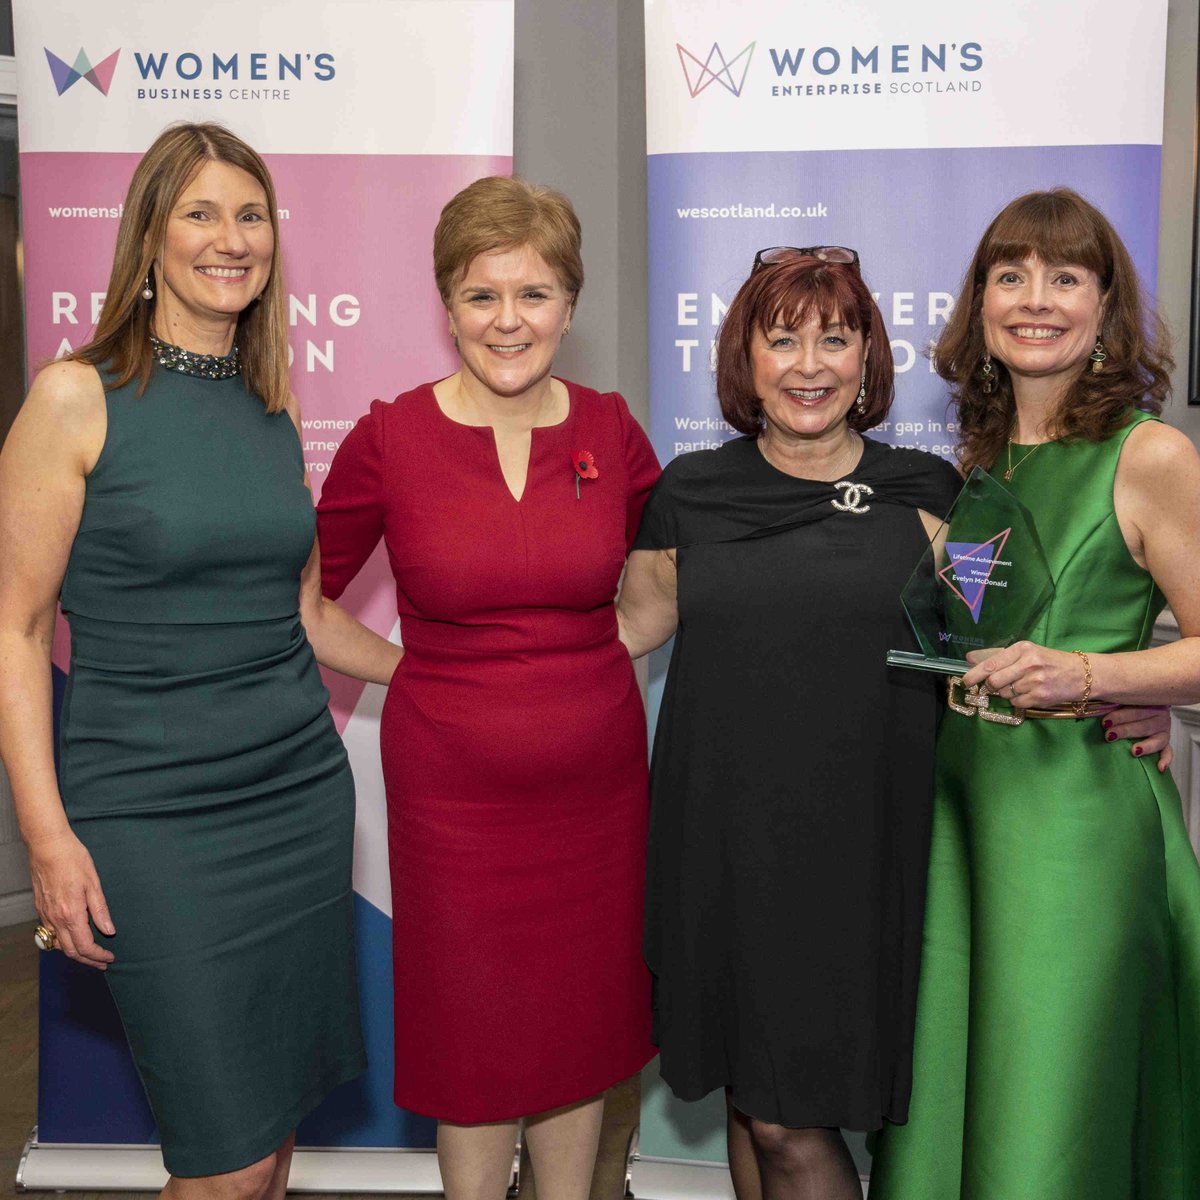 Last night First Minister @NicolaSturgeon attended the @WEScotland Awards, where she presented @_EvelynMcDonald with a lifetime achievement award for her role in supporting the next generation of women in business. More ▶️ wescotland.co.uk/single-post/wi… #WESAwards2022